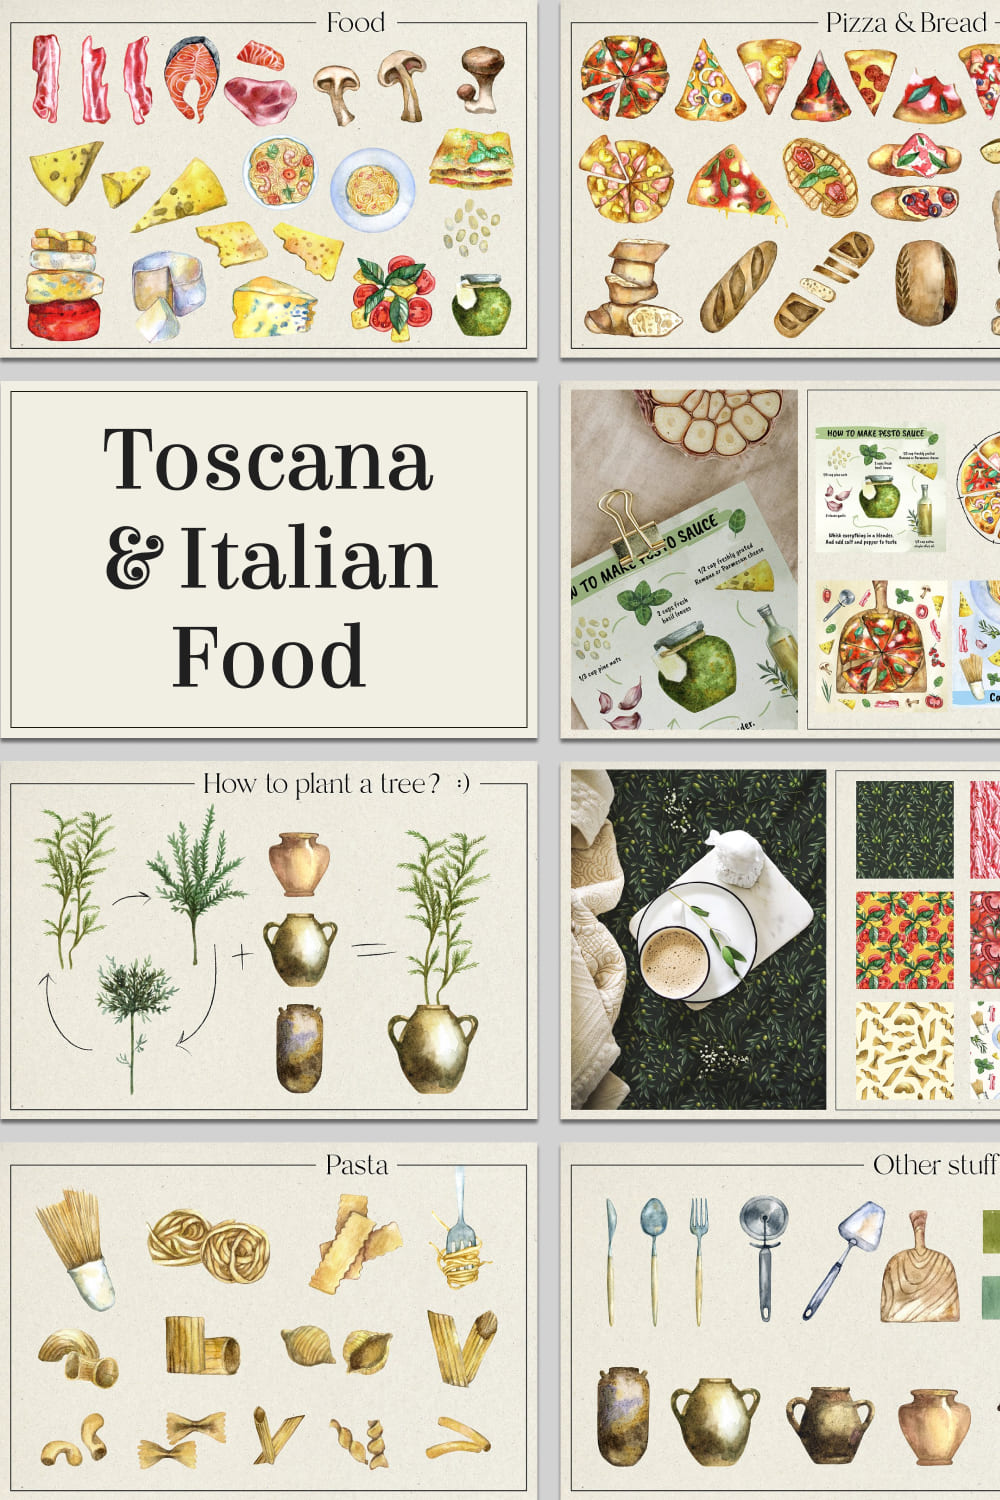 Toscana italian food - pinterest image preview.